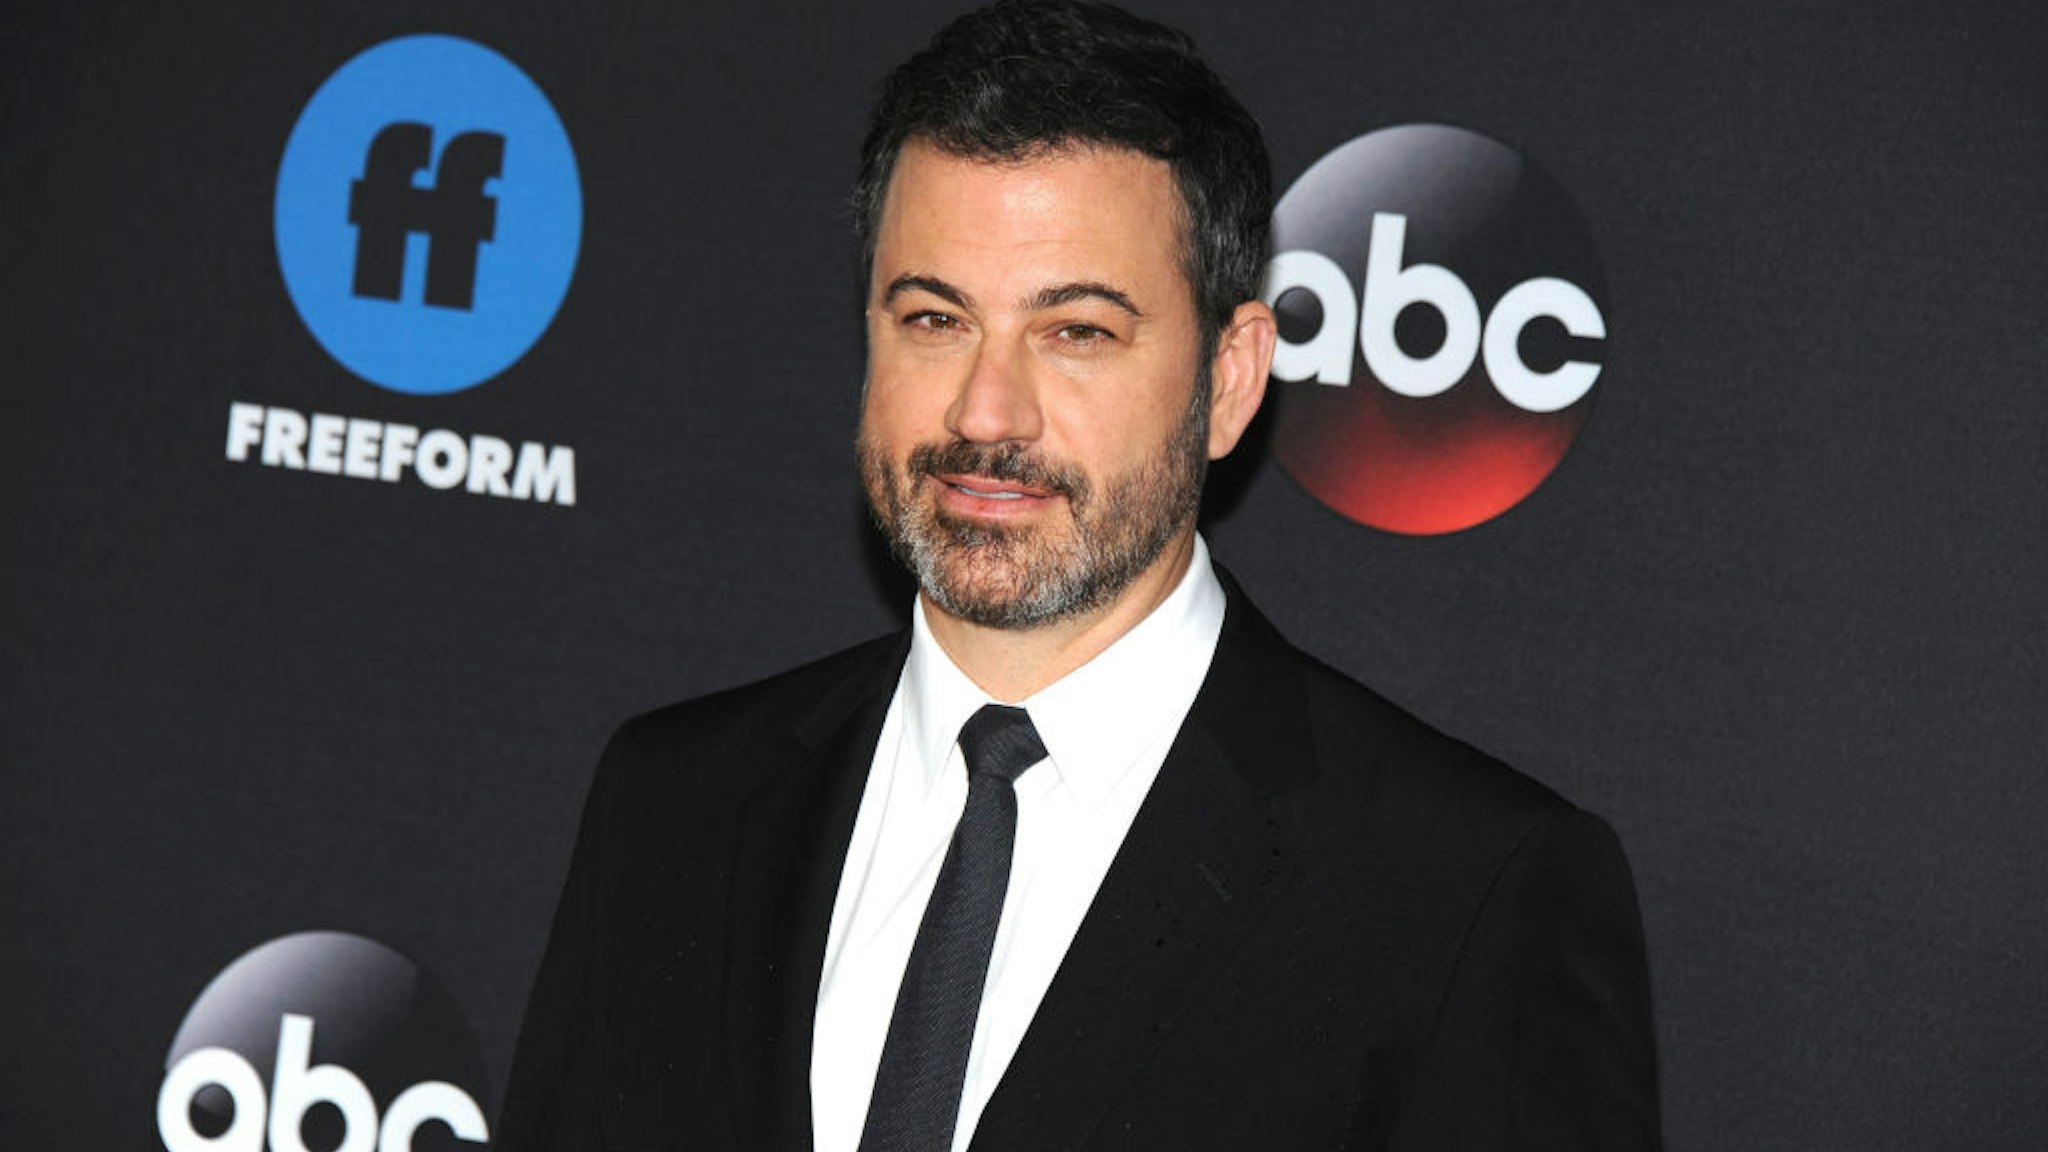 NEW YORK, NY - MAY 15: TV Personality Jimmy Kimmel attends the 2018 Disney, ABC, Freeform Upfront on May 15, 2018 in New York City. (Photo by Desiree Navarro/WireImage)